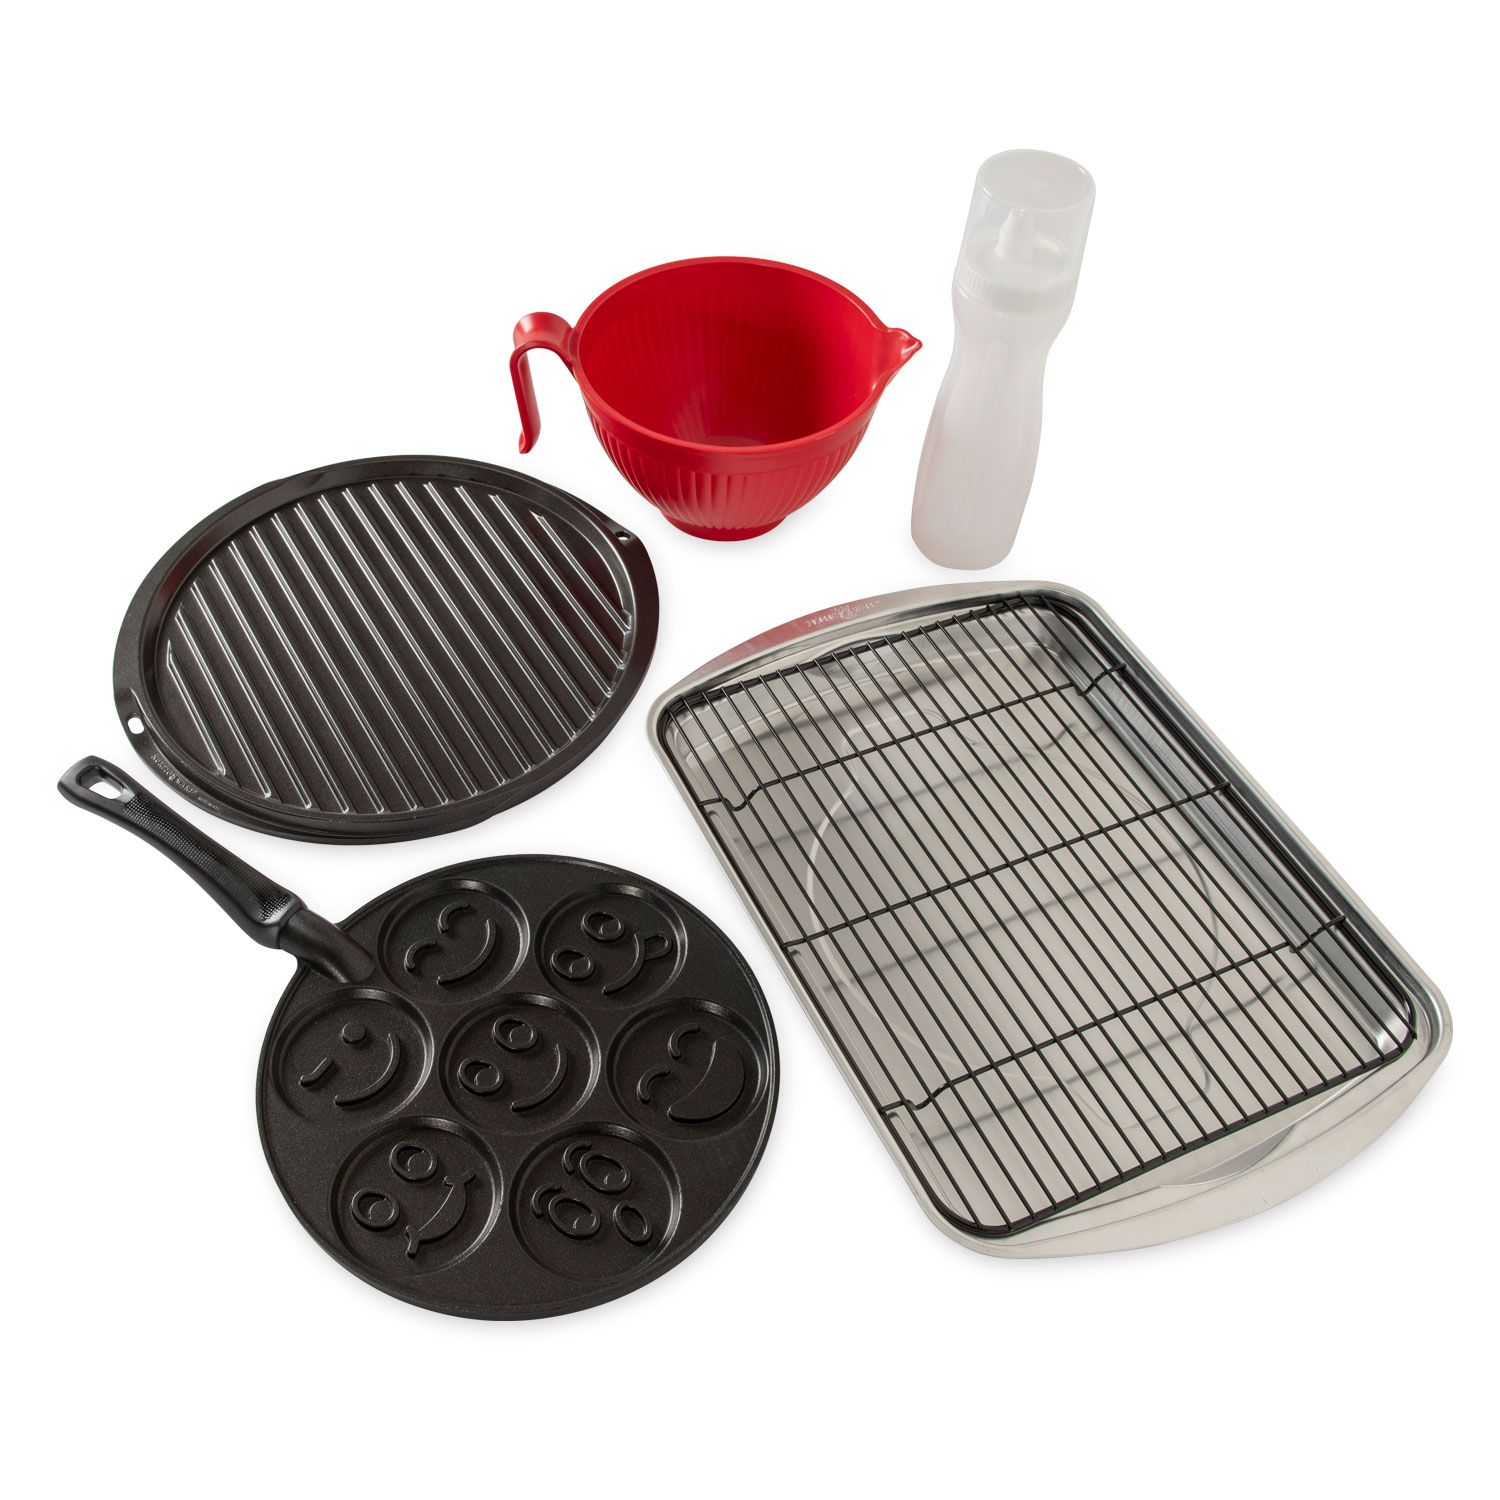 Nordic Ware Deluxe Pancakes and Bacon Breakfast Set